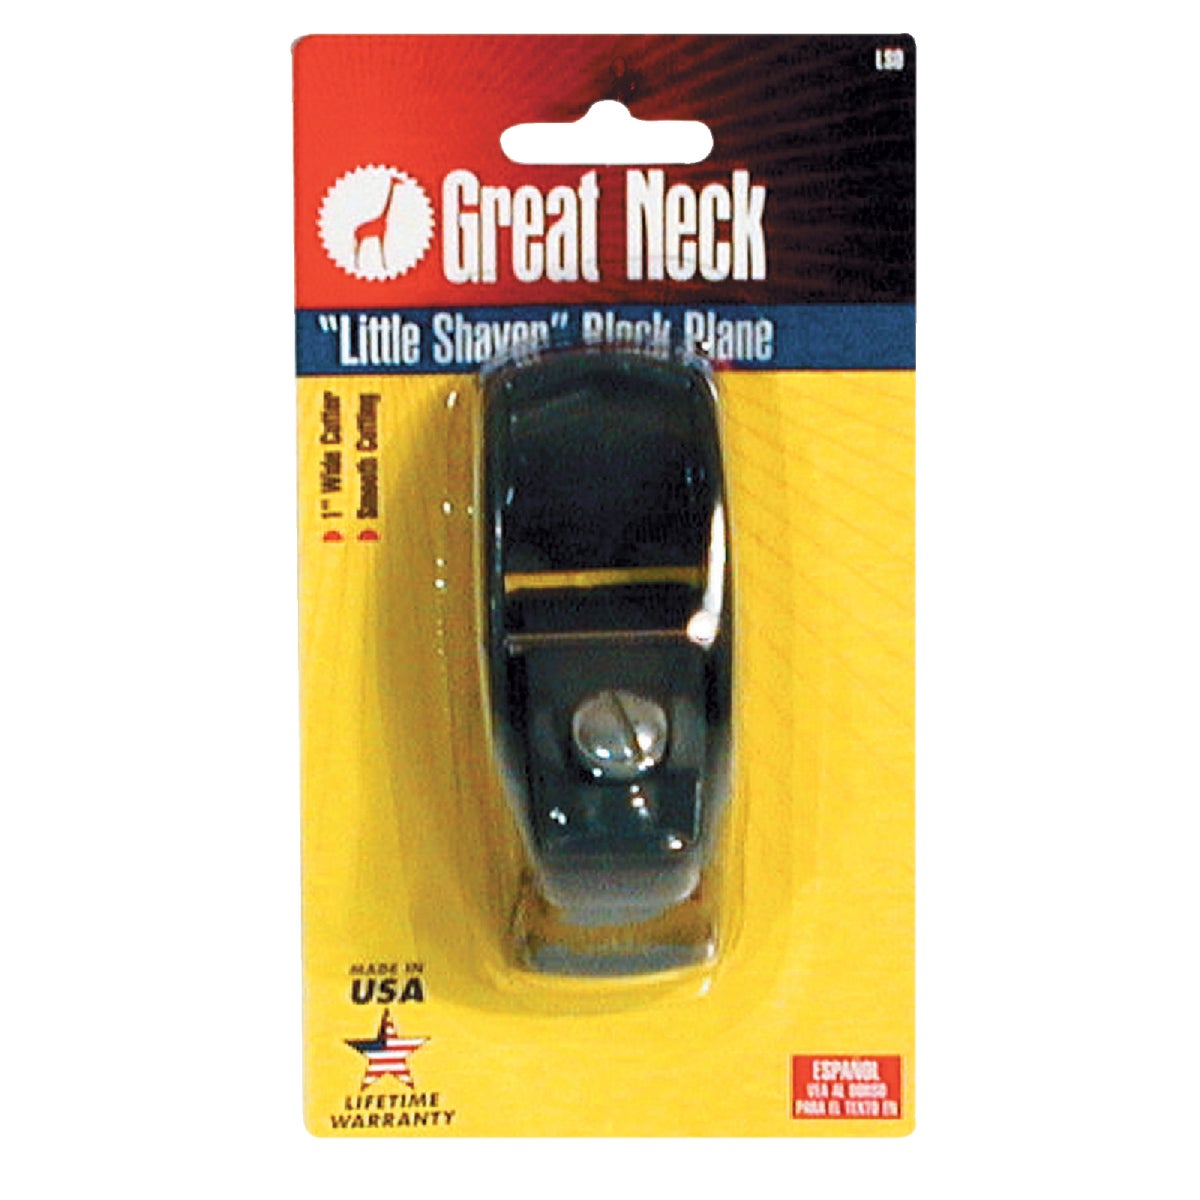 Great Neck 3-1/2 In. Mini Block Plane with 1 In. Cutter